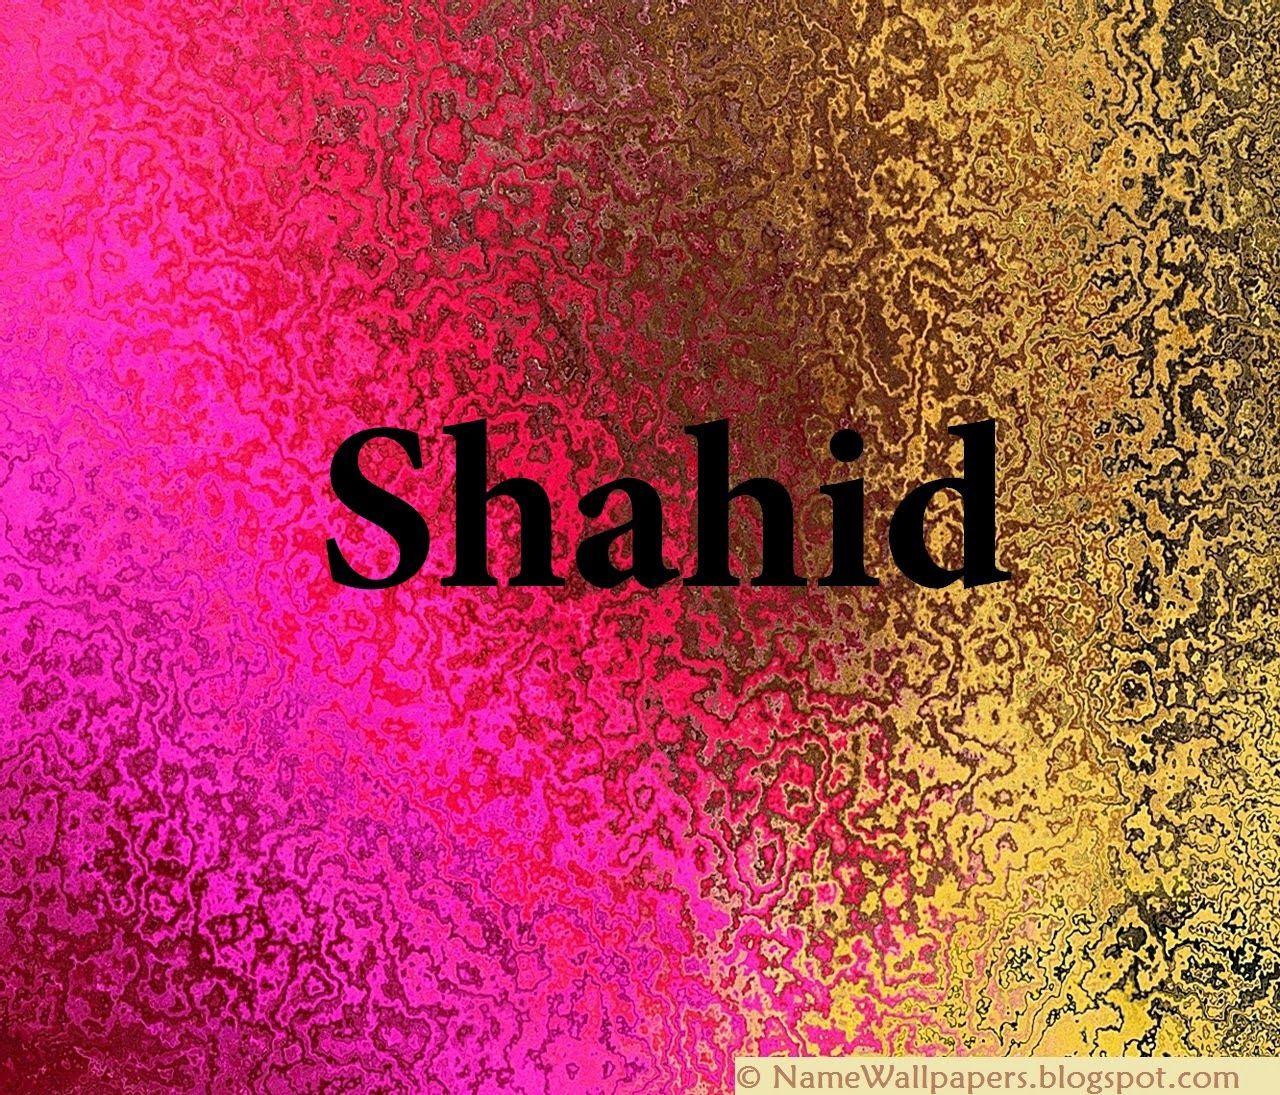 Shahid Name Wallpapers Shahid ~ Name Wallpapers Urdu Name Meaning